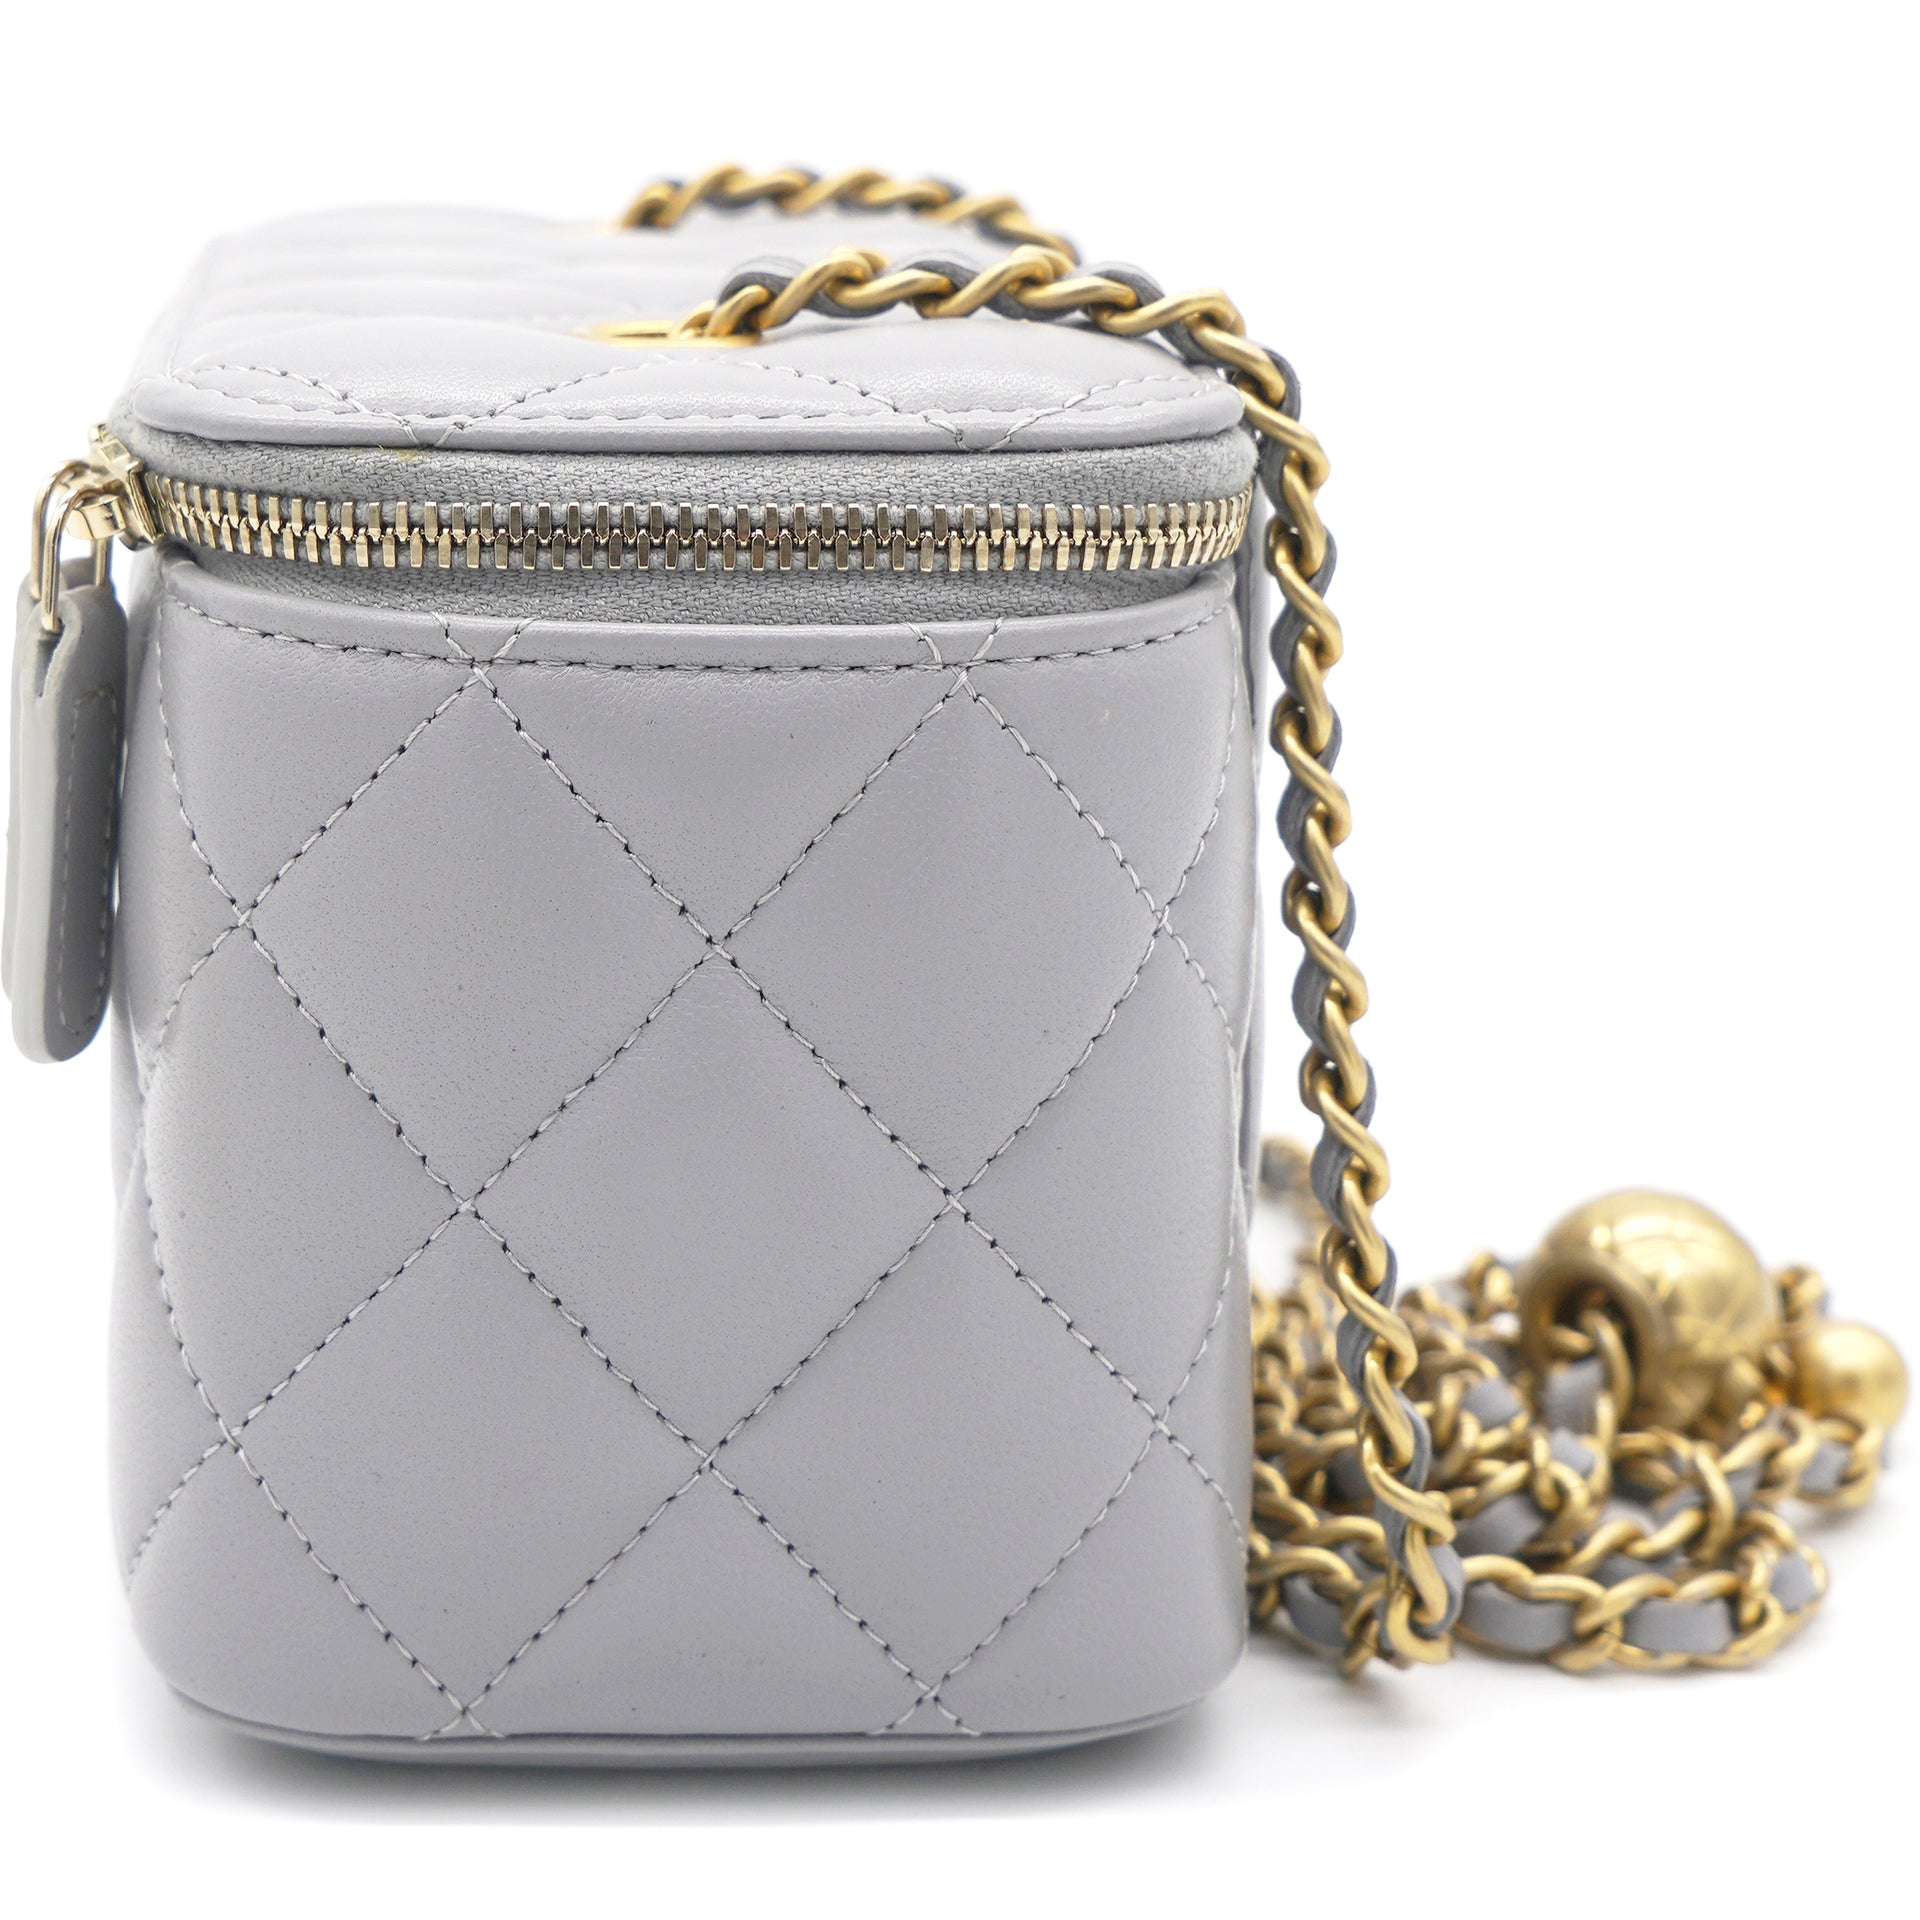 Chanel Lambskin Quilted Pearl Crush Small Vanity Case with Chain